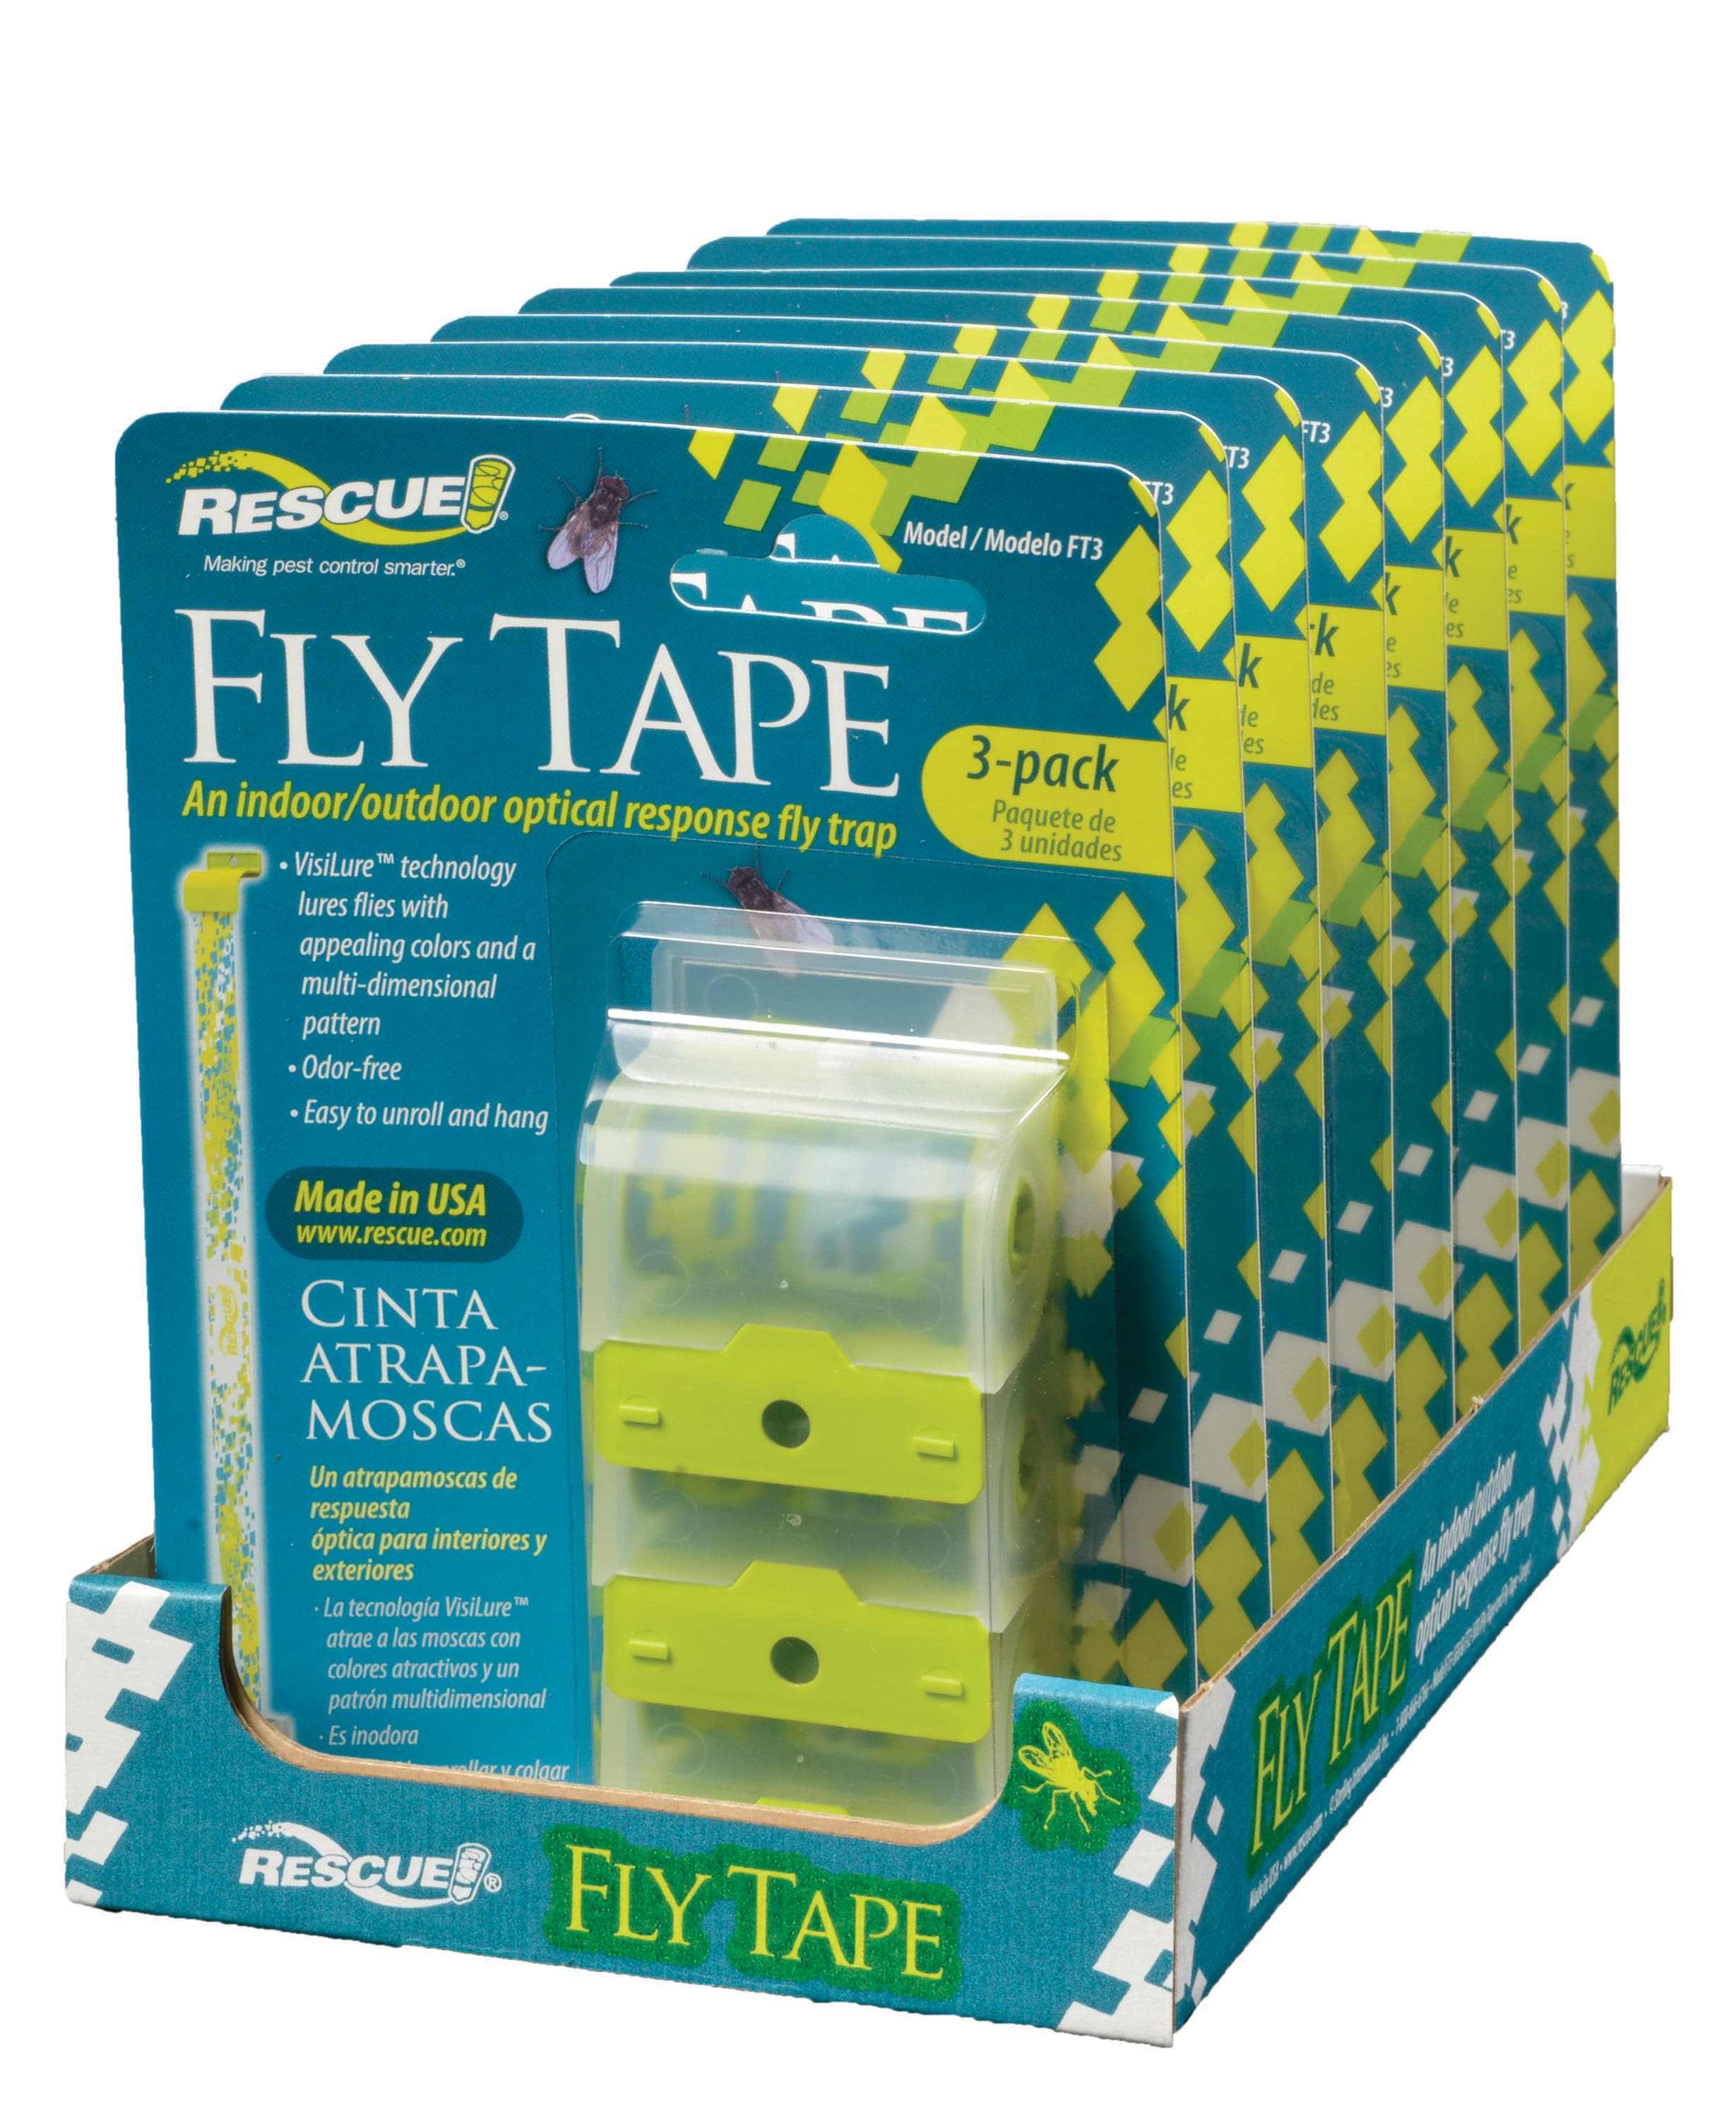 RESCUE! Rescue! Fly Tape Indoor/Outdoor (8-Pack) at